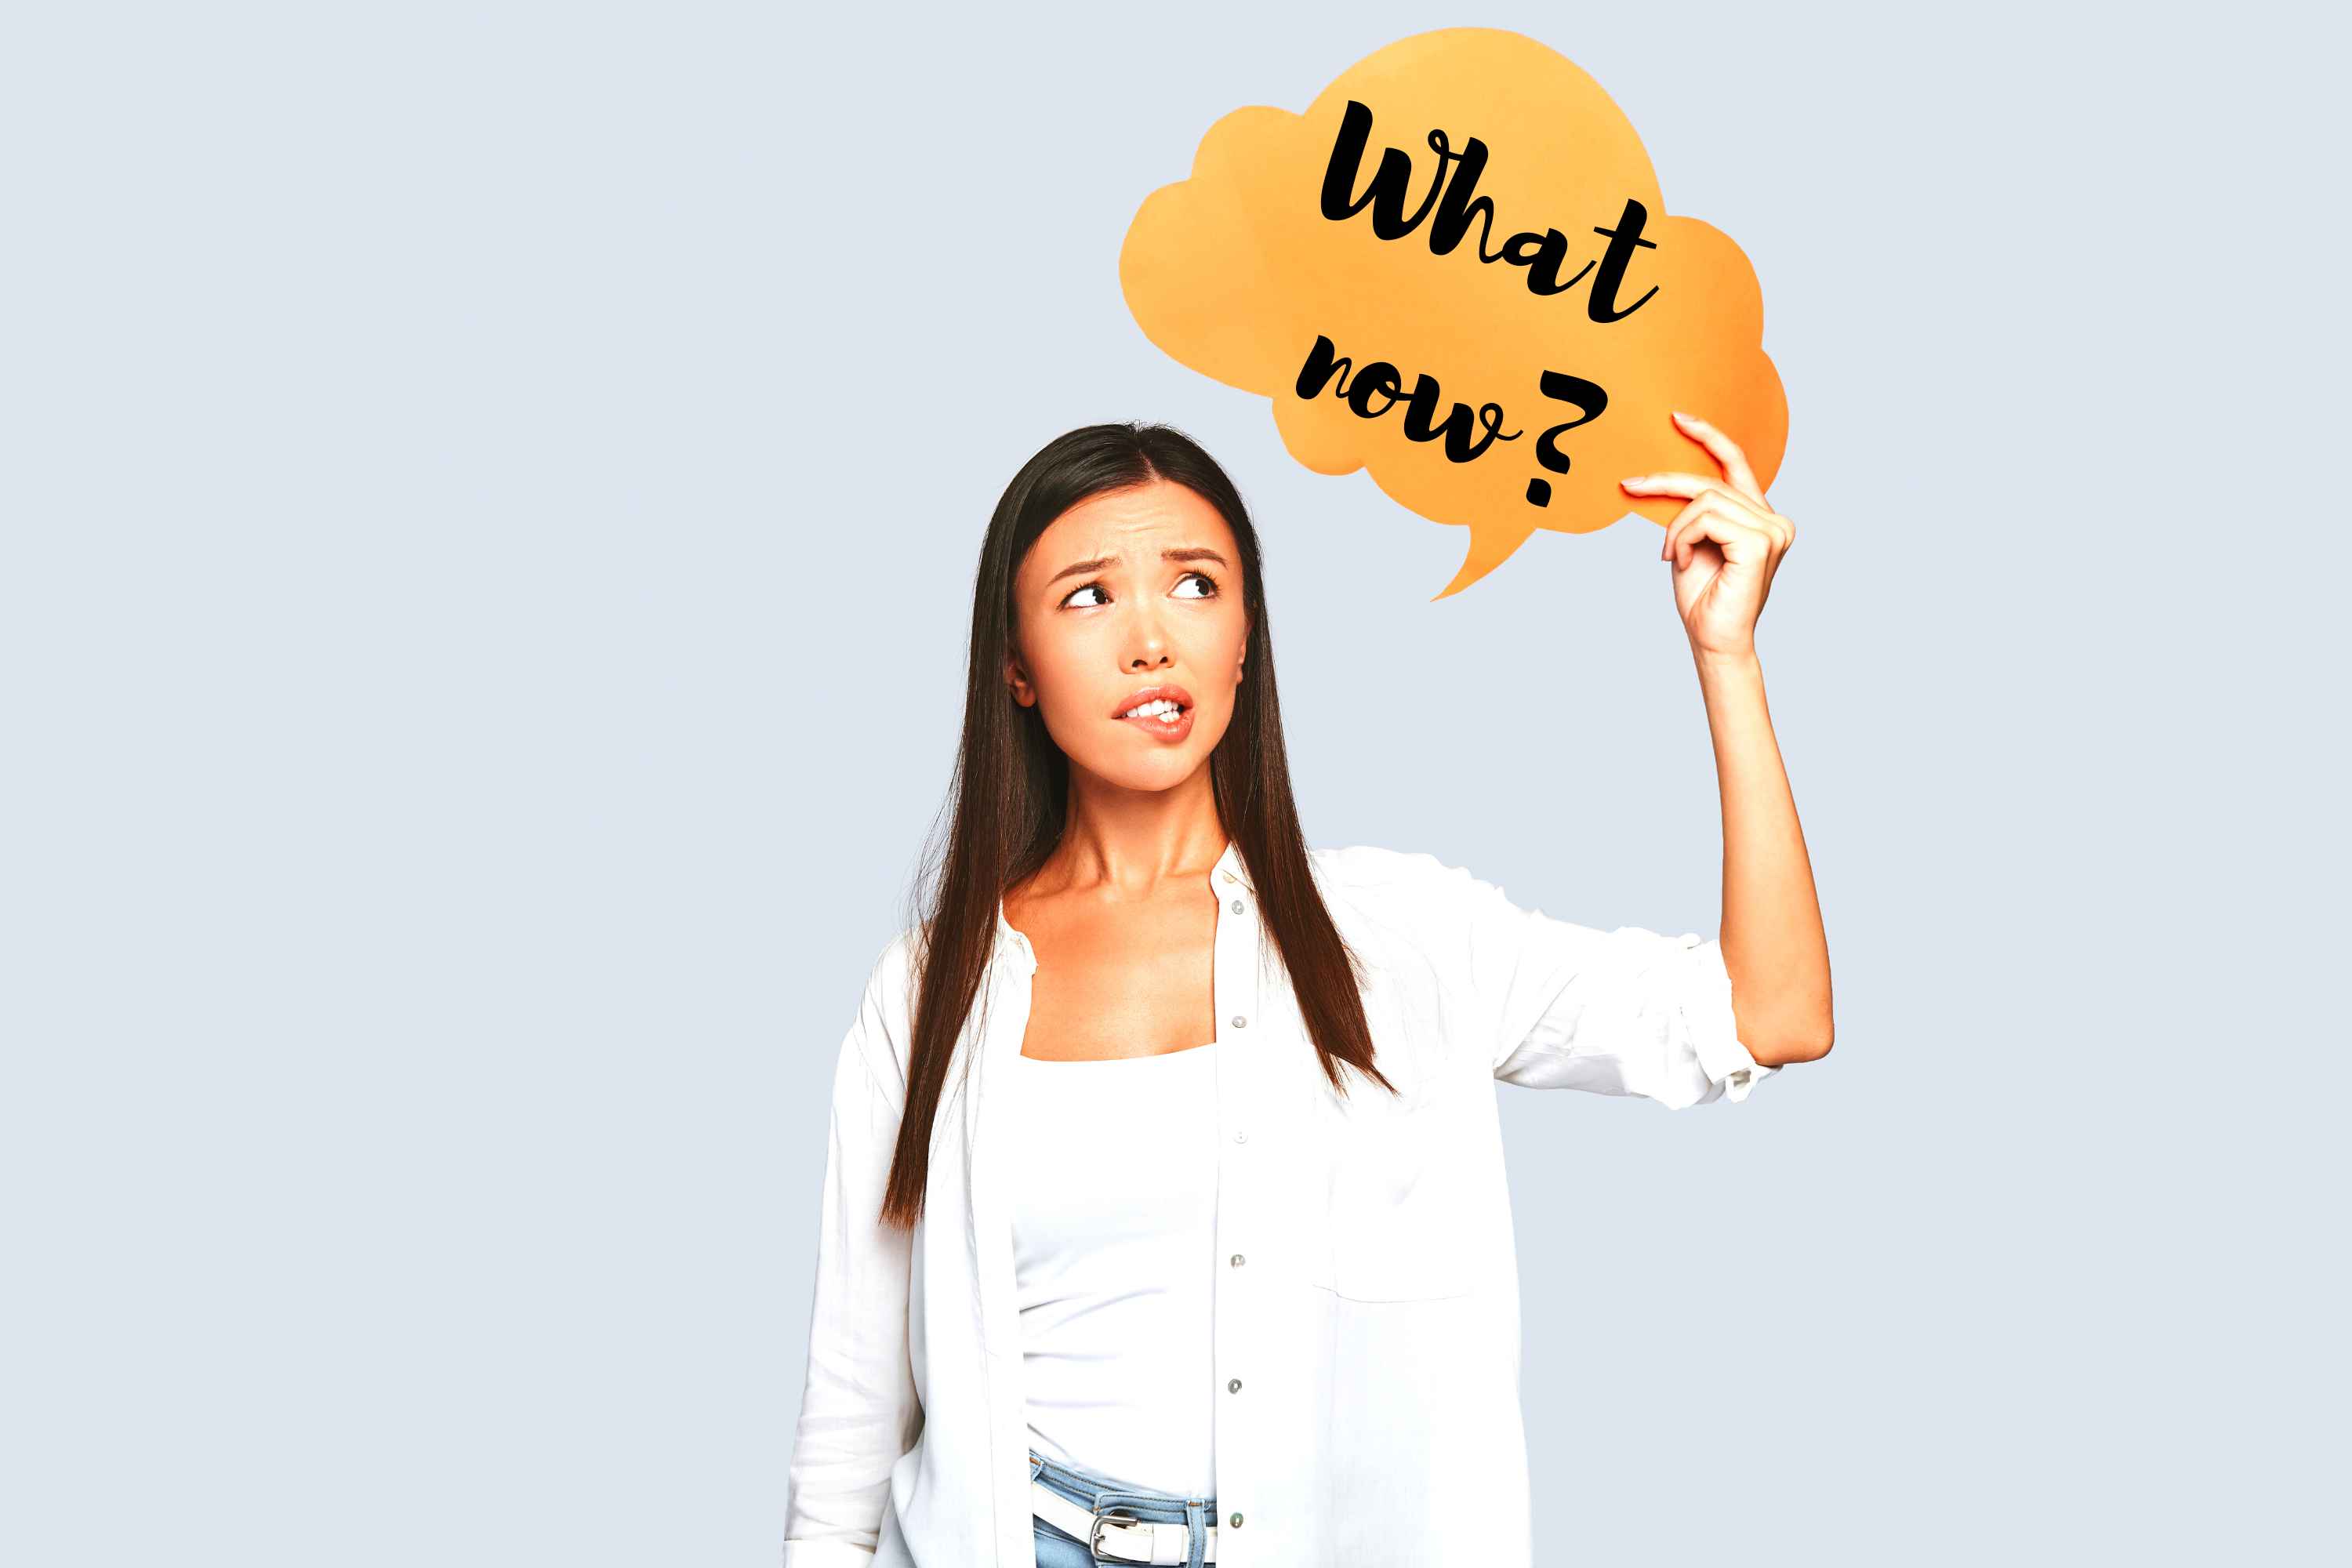 Woman holding speech bubble that says "What now?"